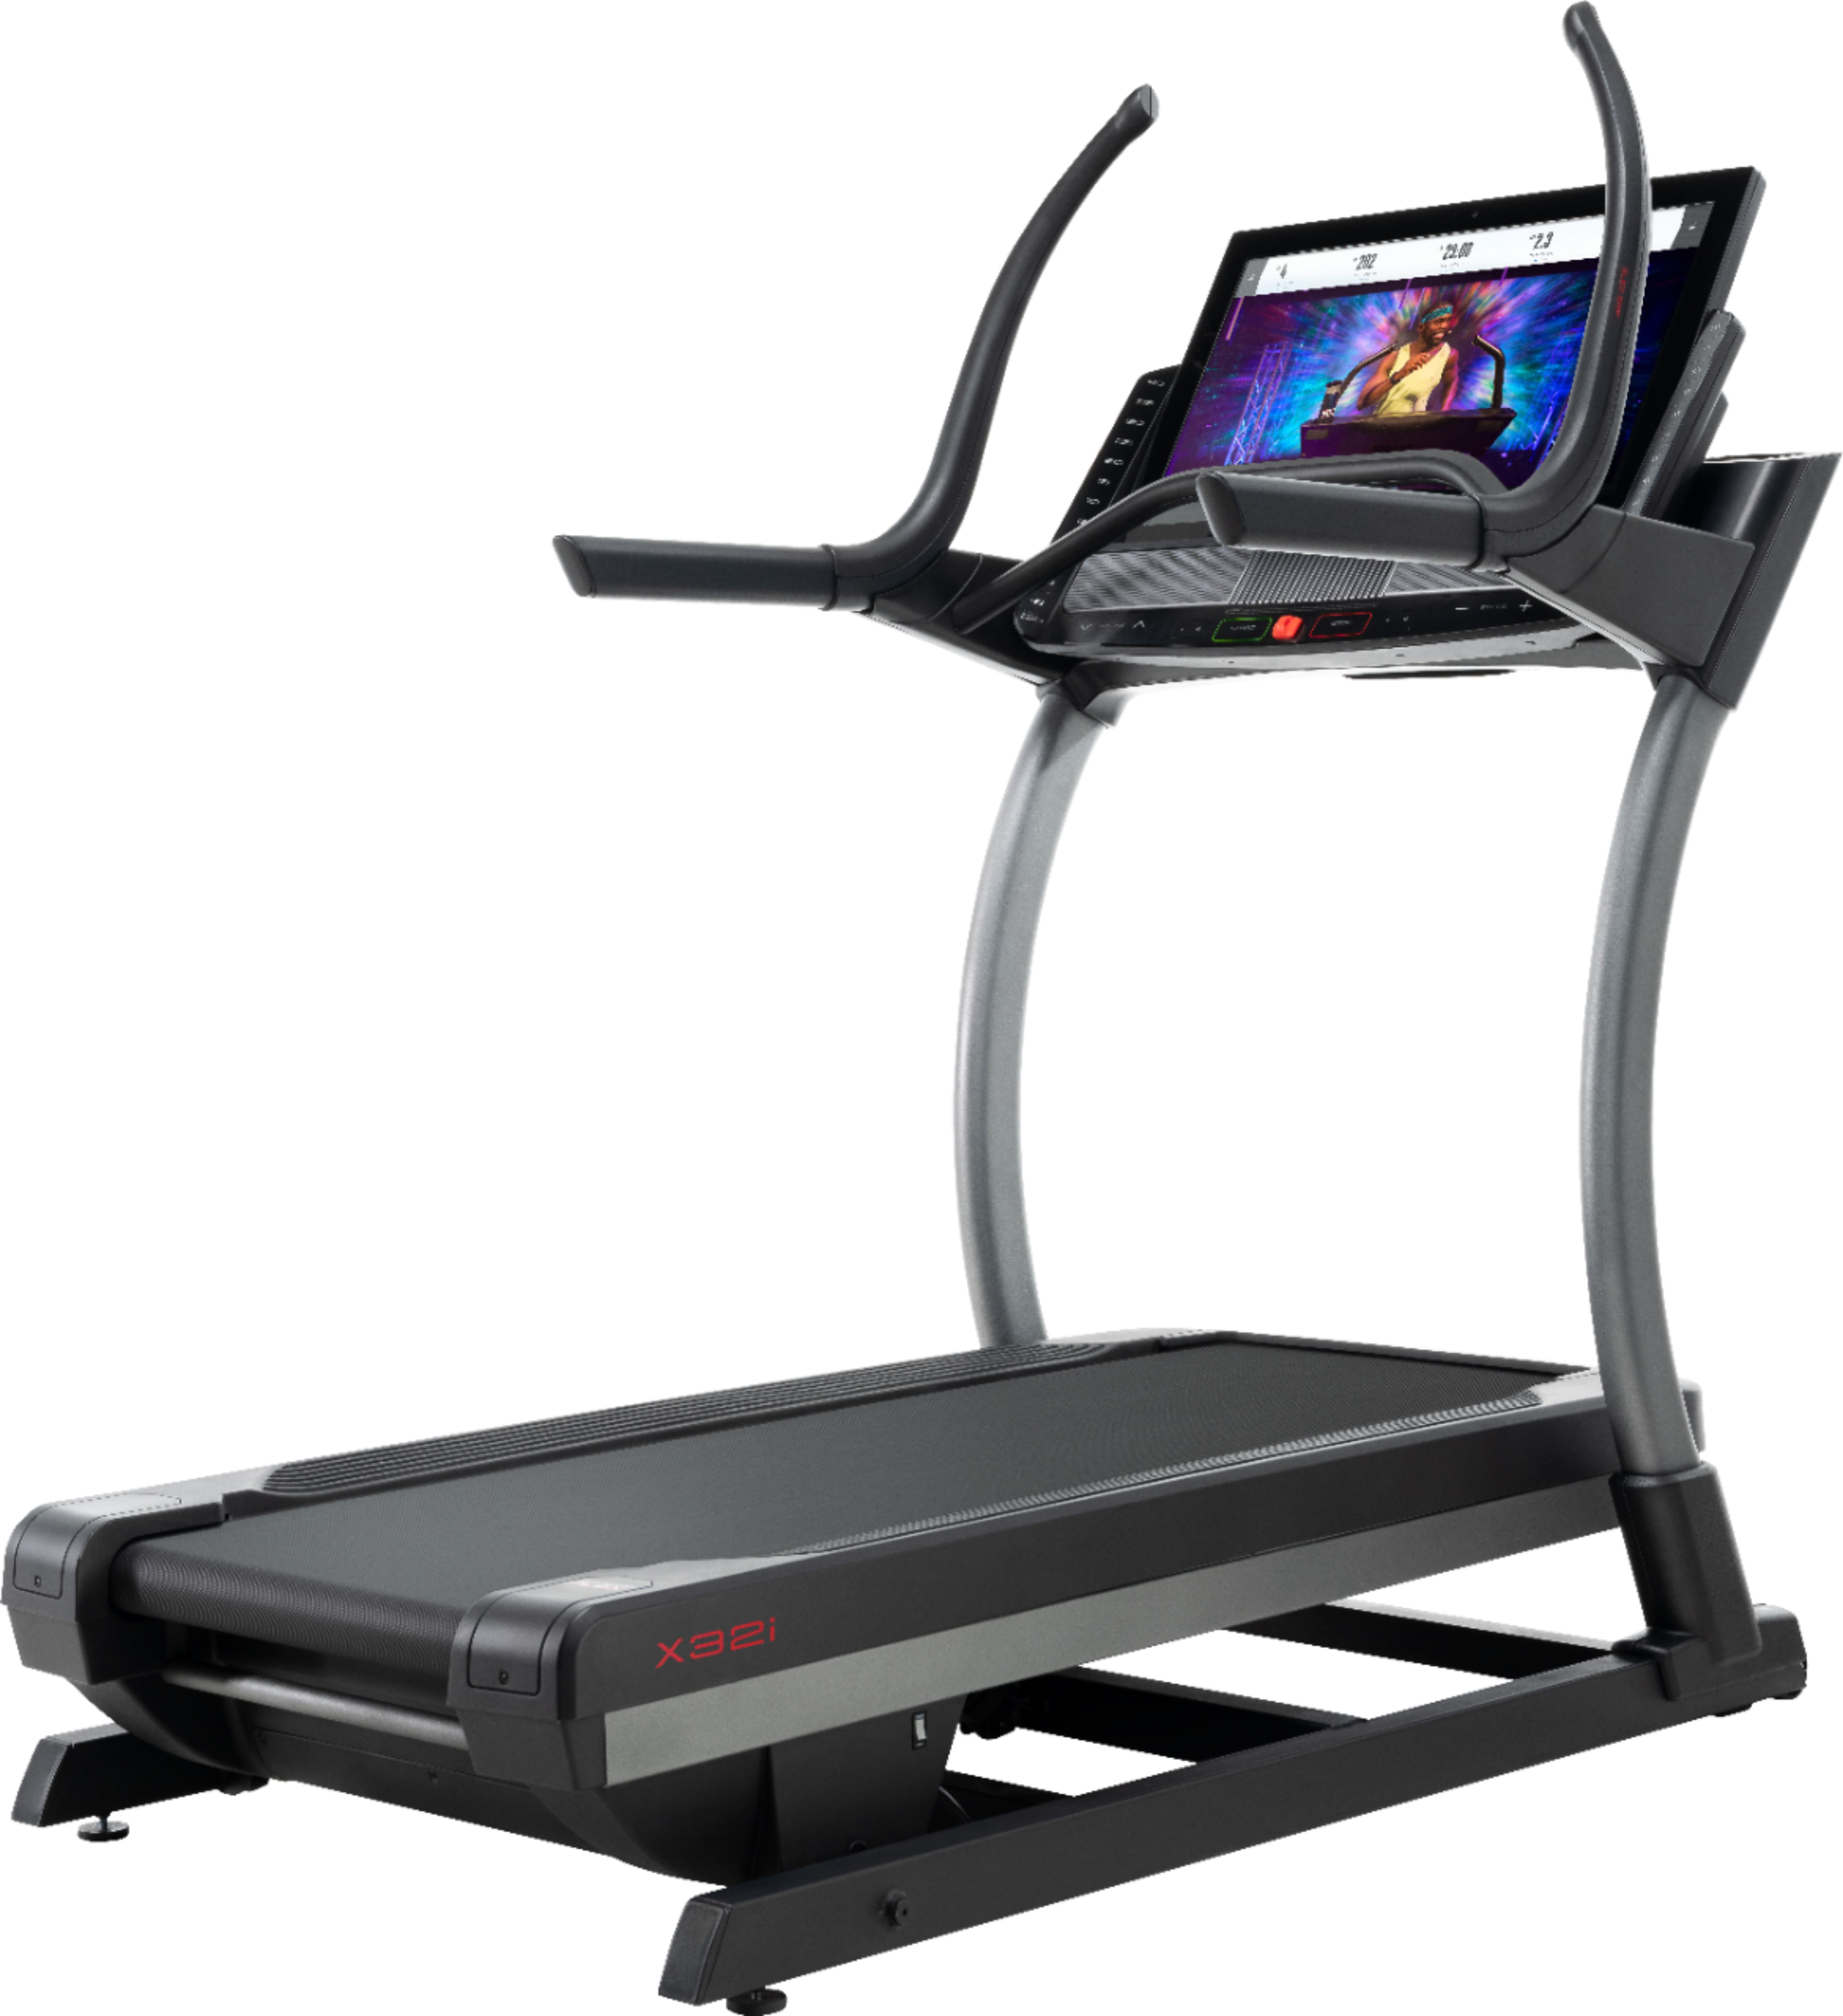 Nordictrack Screen Hacks : Nordictrack X11i Treadmill Review Pros And Cons 2020 Treadmill Reviews 2021 Best Treadmills Compared : Nordictrack's x22i incline trainer is used by elite ultrarunners like ian sharman, jeff browning and kyle pietari.